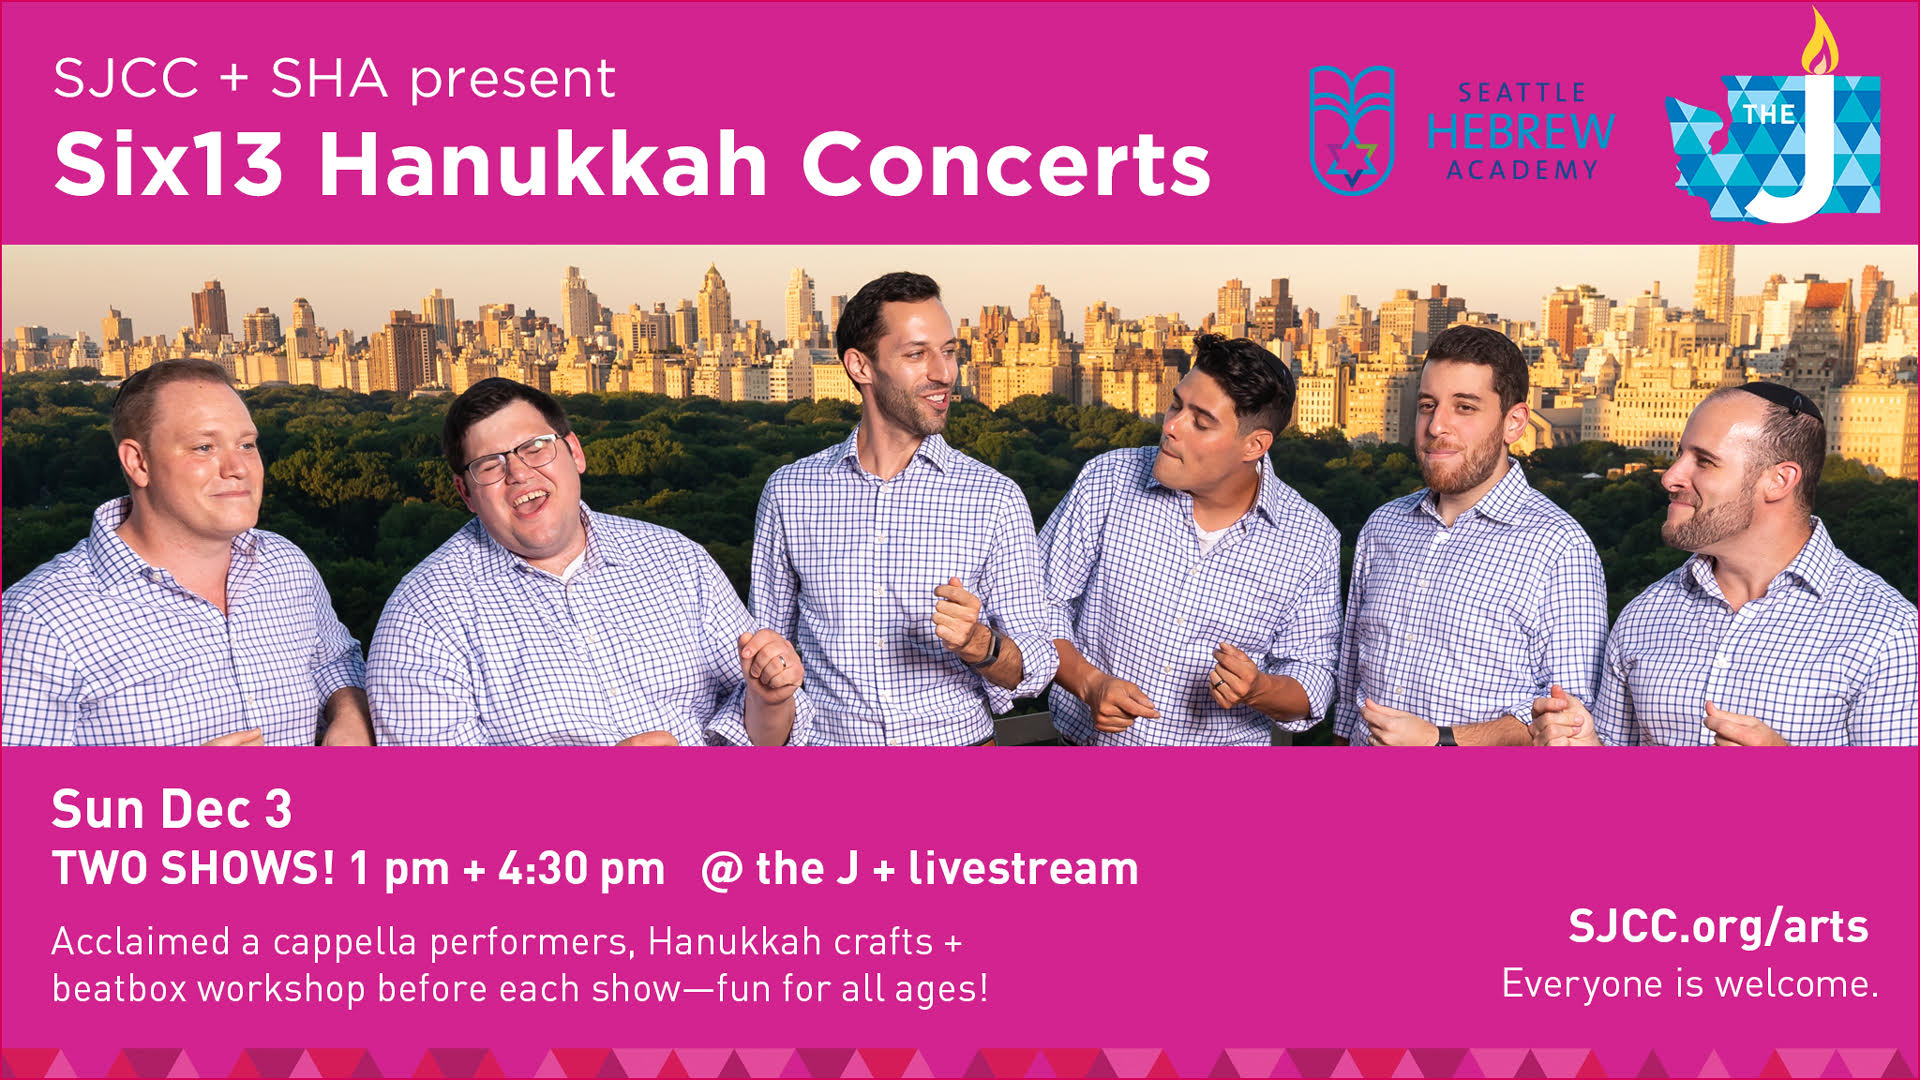 Join the J and Seattle Hebrew Academy for an amazing a cappella Hanukkah concert from the Six13s!